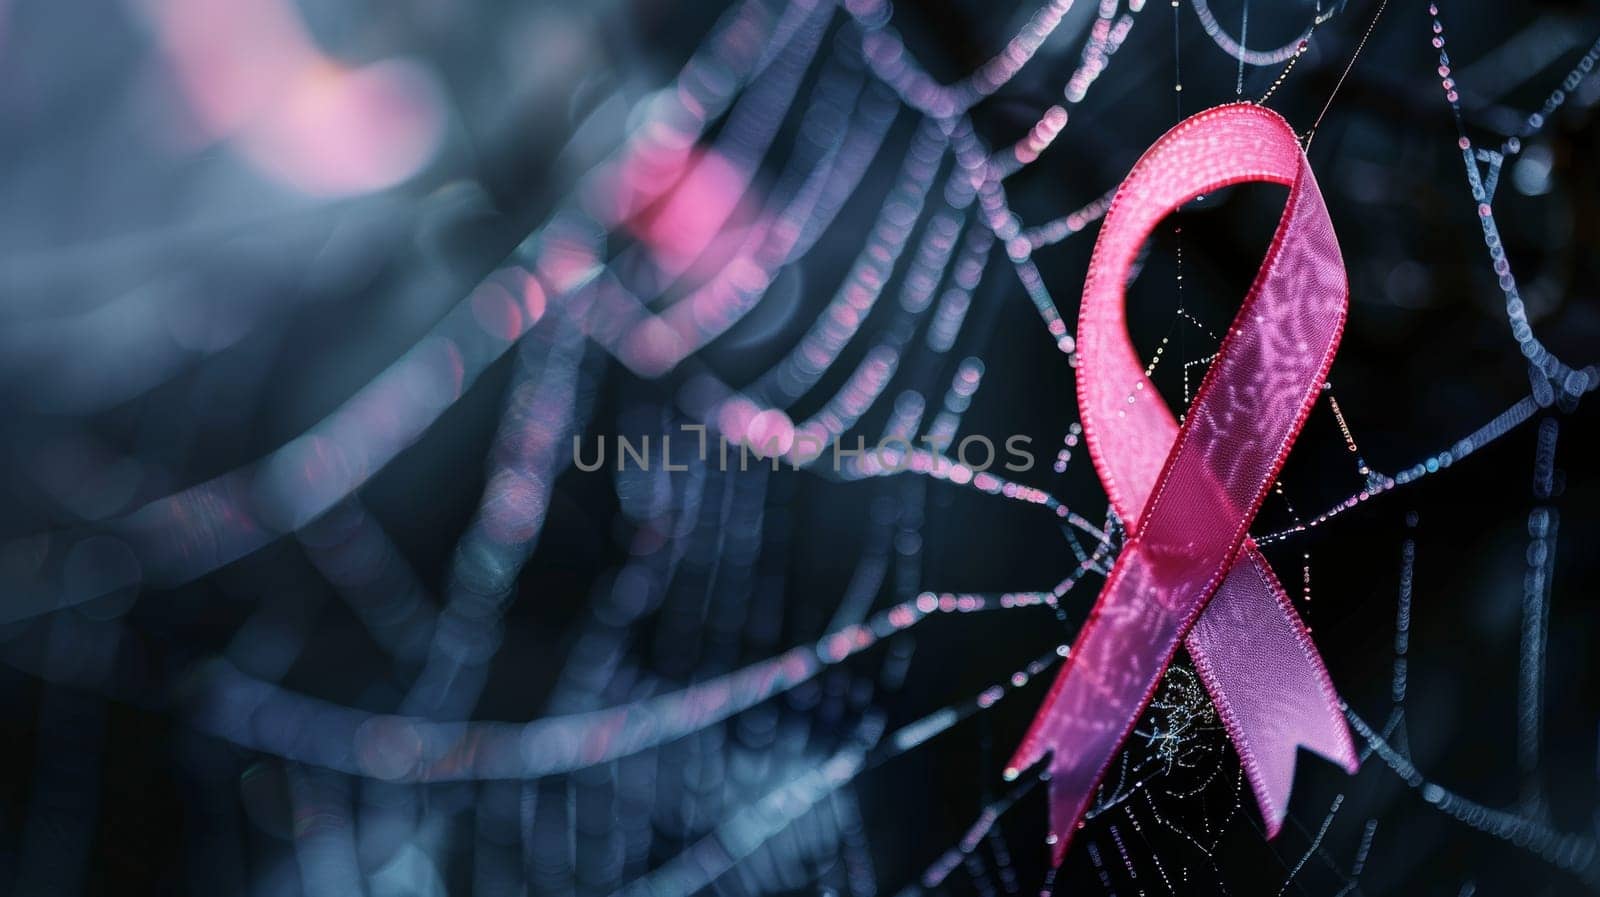 Pink ribbon awareness symbol resting on spider web with dew drops. Symbolic of Breast Cancer Awareness Month in October.